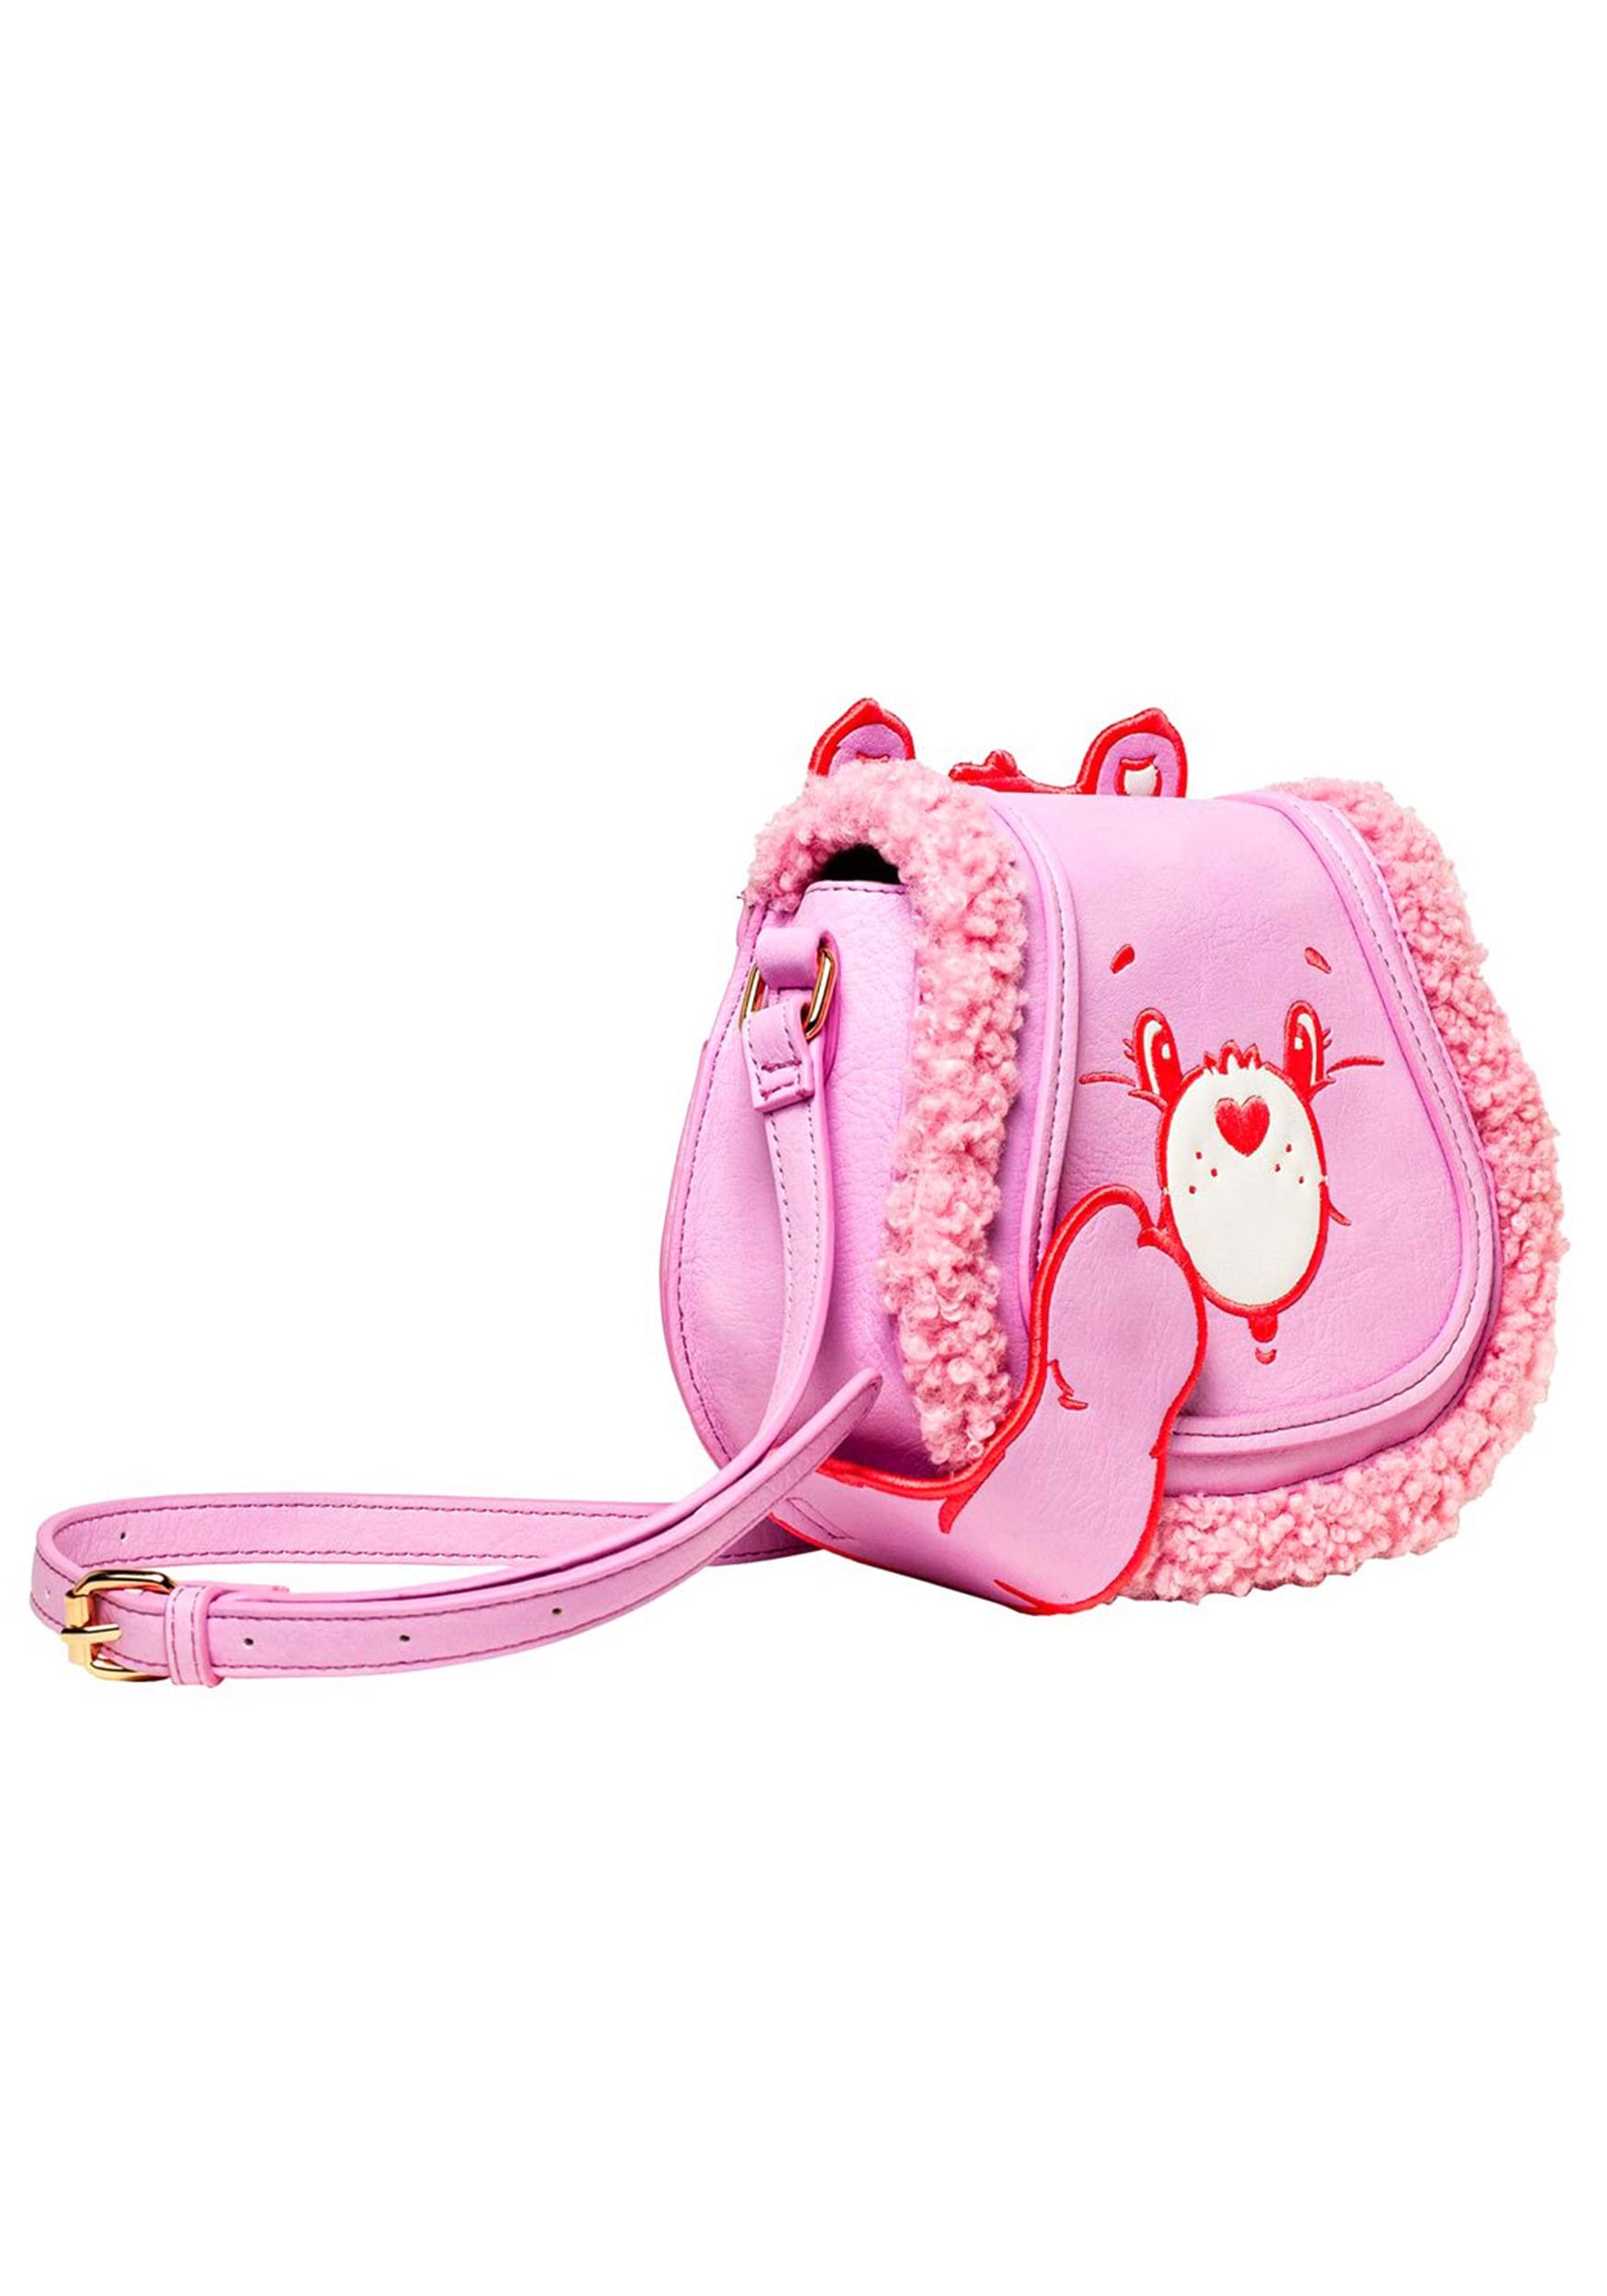 Toddler Shoulder Bag, Purse with Flowers Kids Handbag for Children for  School for Outdoor(Pink) : Amazon.in: Shoes & Handbags